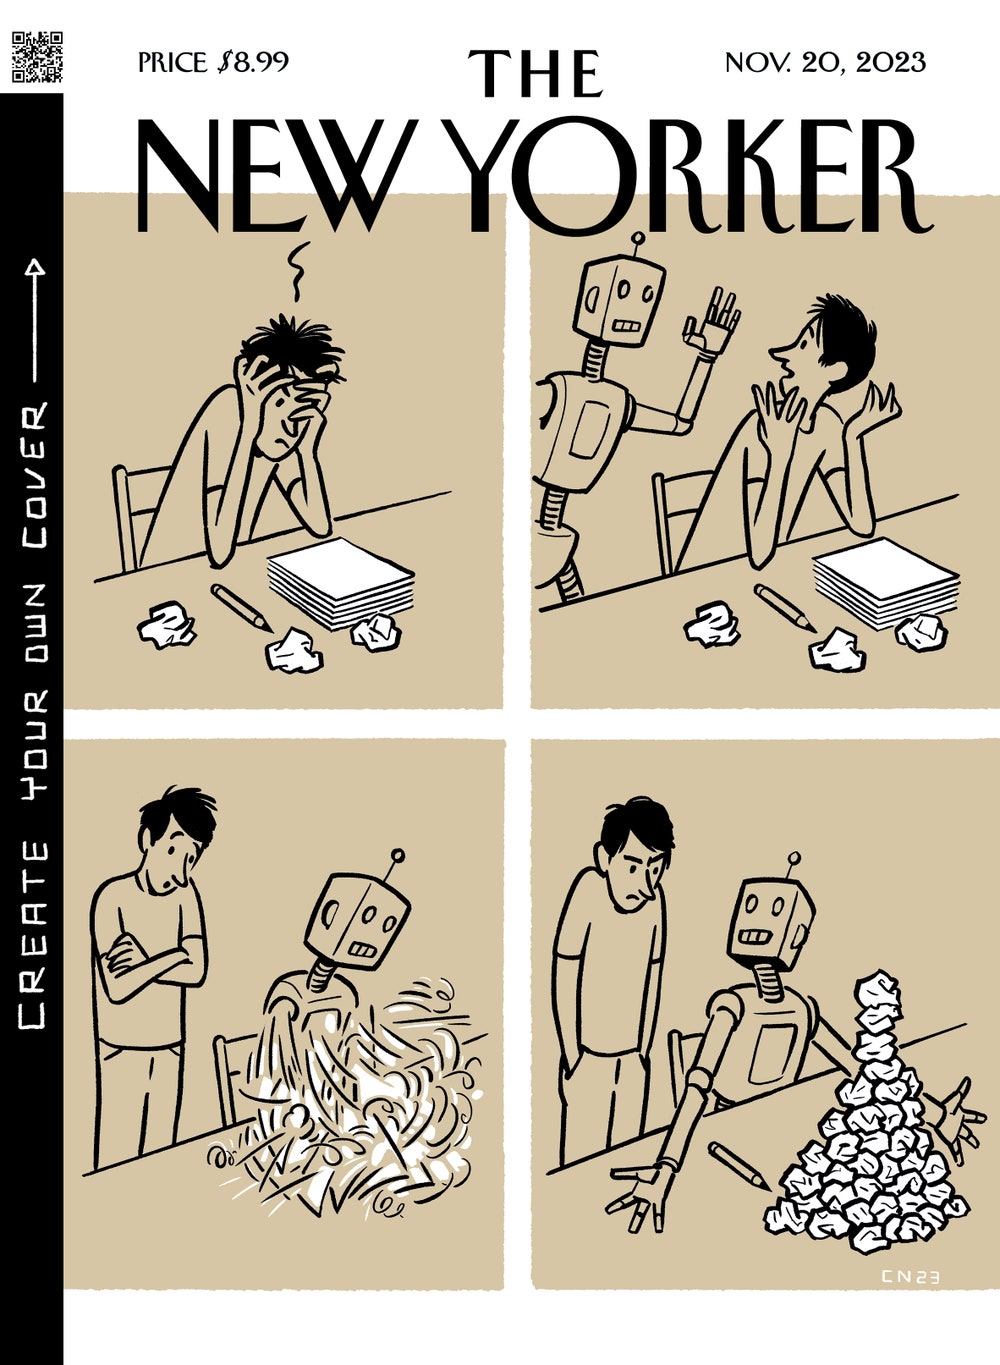 The New Yorker, November 20, 2023 Issues Magazine Shop